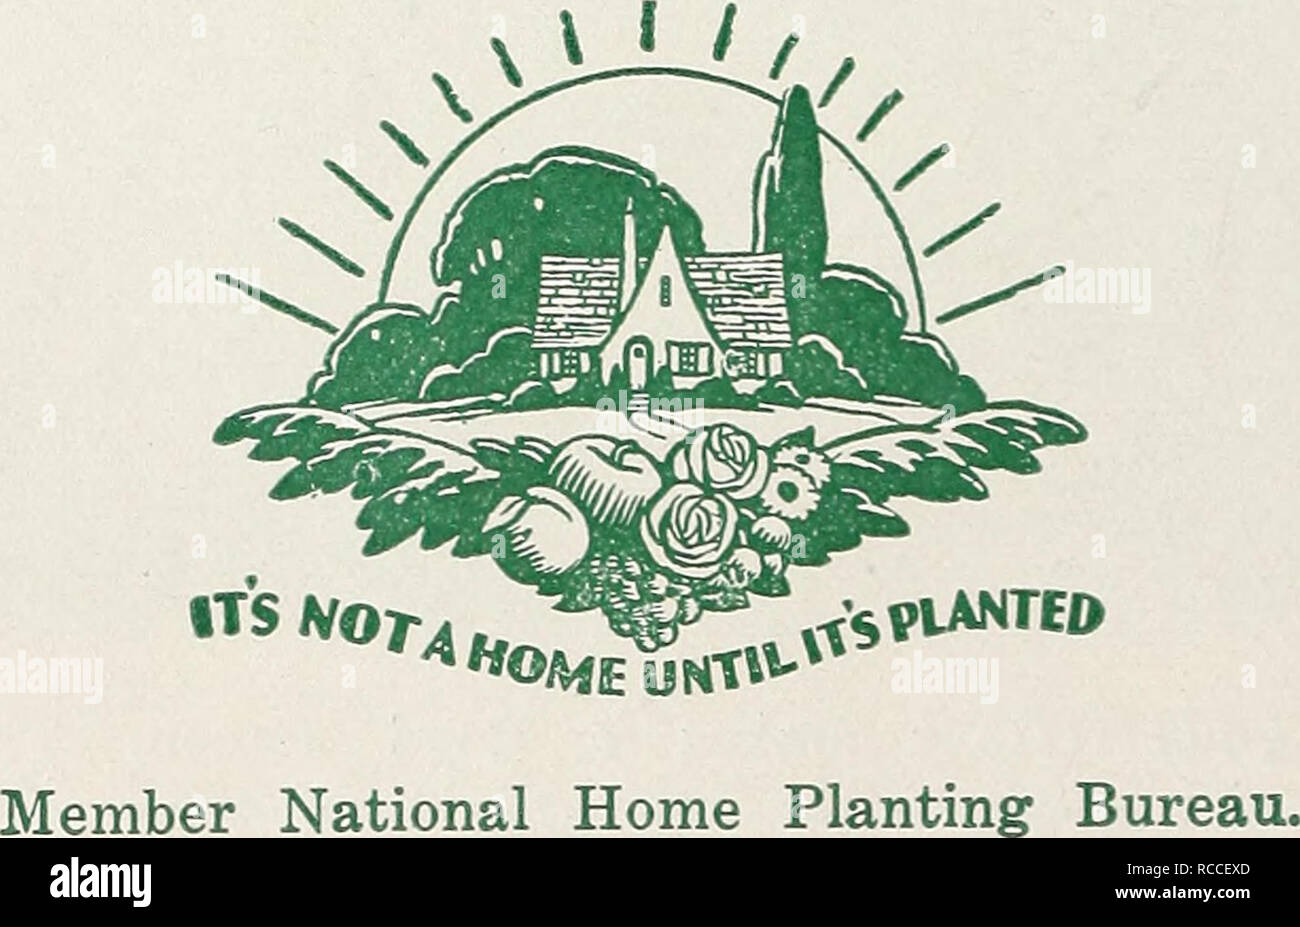 . The dixie planter : fall, 1931. Nurseries (Horticulture) Catalogs; Nursery stock Catalogs; Shrubs Catalogs; Trees Catalogs; Fruit Catalogs. 18 Early Spring Flowering Shrubs, (continued) Forsythia viridissima. Golden Bell. Bright golden-colored flowers in profusion. Free grower. 2 to 3 ft 50 3 to 4 ft 60 Forsythia fortunei. Fortune's Goldenbell. Latest to bloom. 2 to 3 ft 50 3 to 4 ft 60 4 to 5 ft 75 Cydonia japonica. Fire Bush. Japanese Quince. Abundant red flowers. IV2 to 2 ft 60 Amygdalus nana pumila. (Prunus japonica). Flowering Almond. Numerous small, double pink flowers all along the st Stock Photo